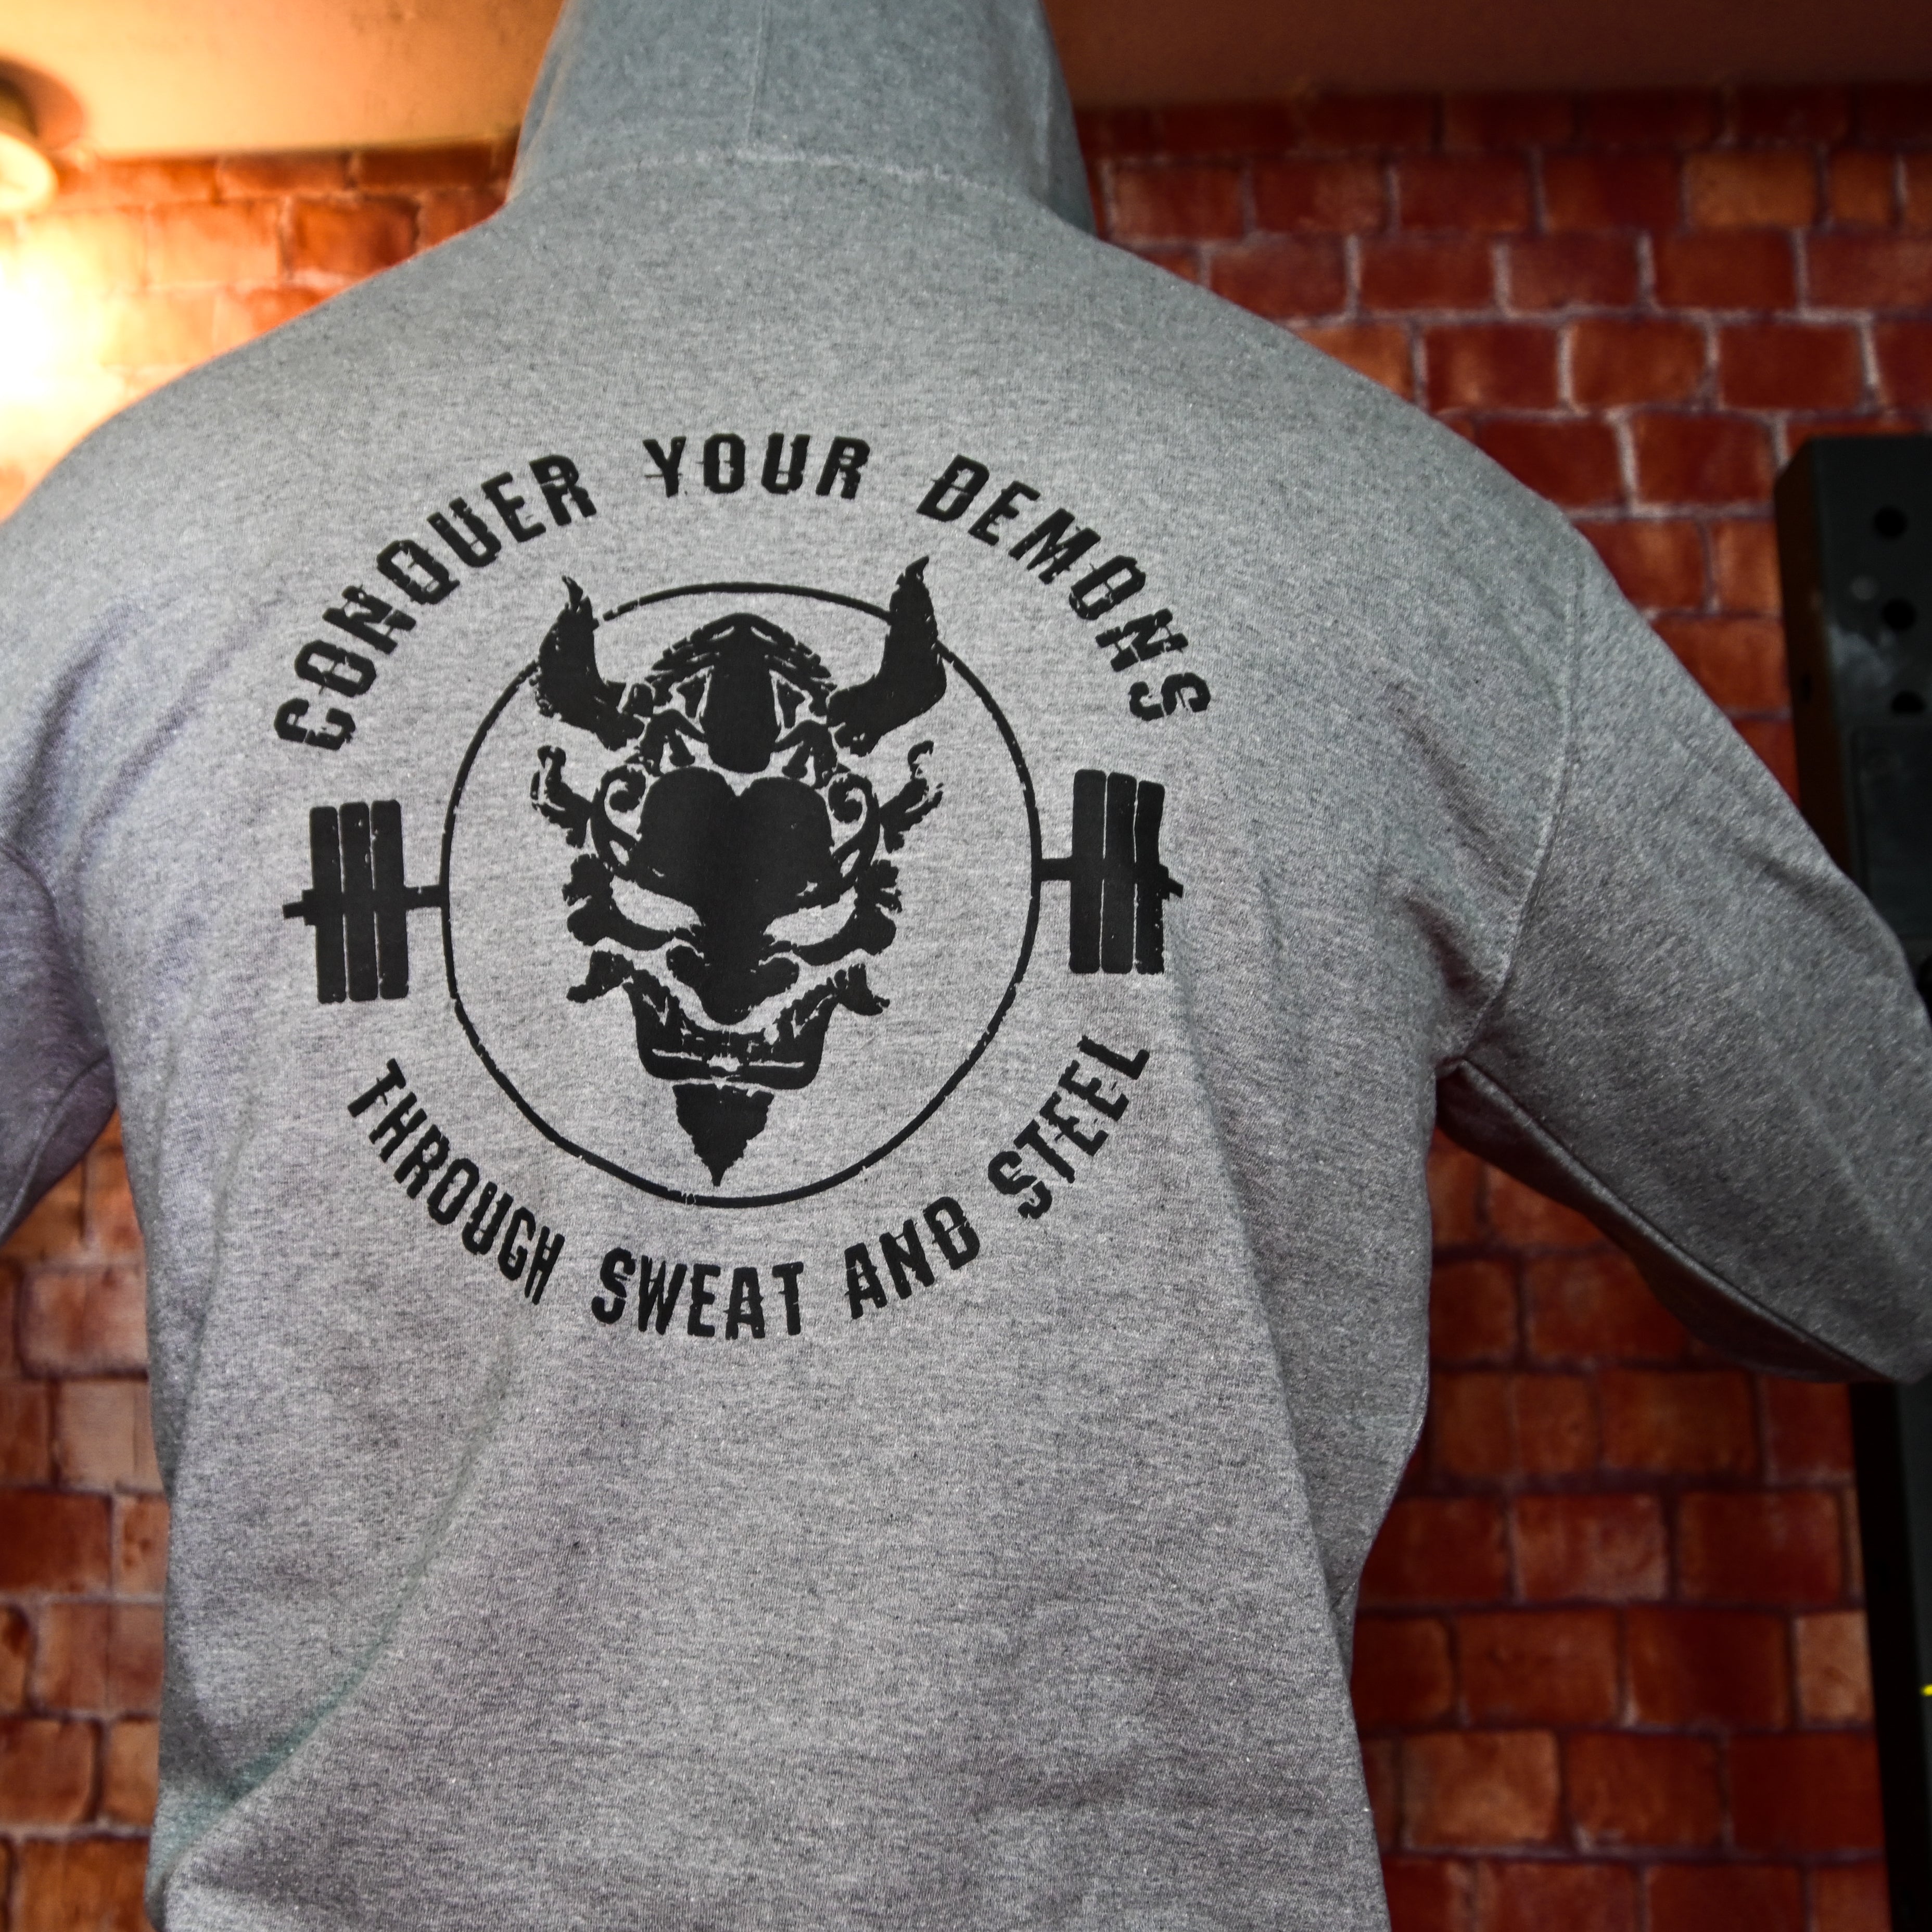 CONQUER YOUR DEMONS MIDWEIGHT HOODIE - GRAY HEATHER